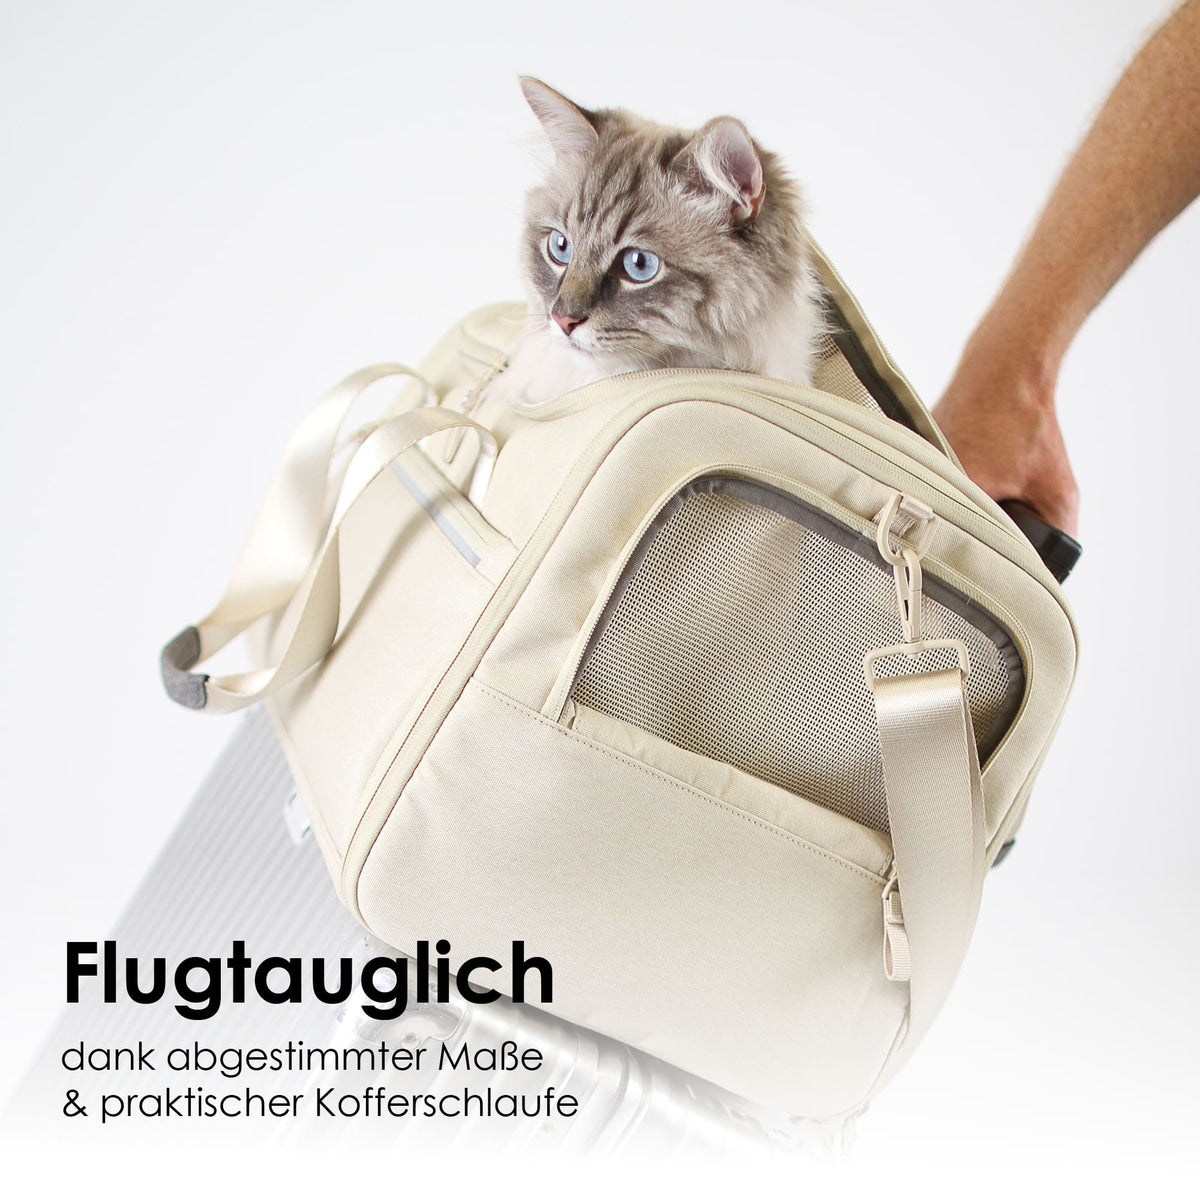 CHECK-IN Sac de transport pour chat